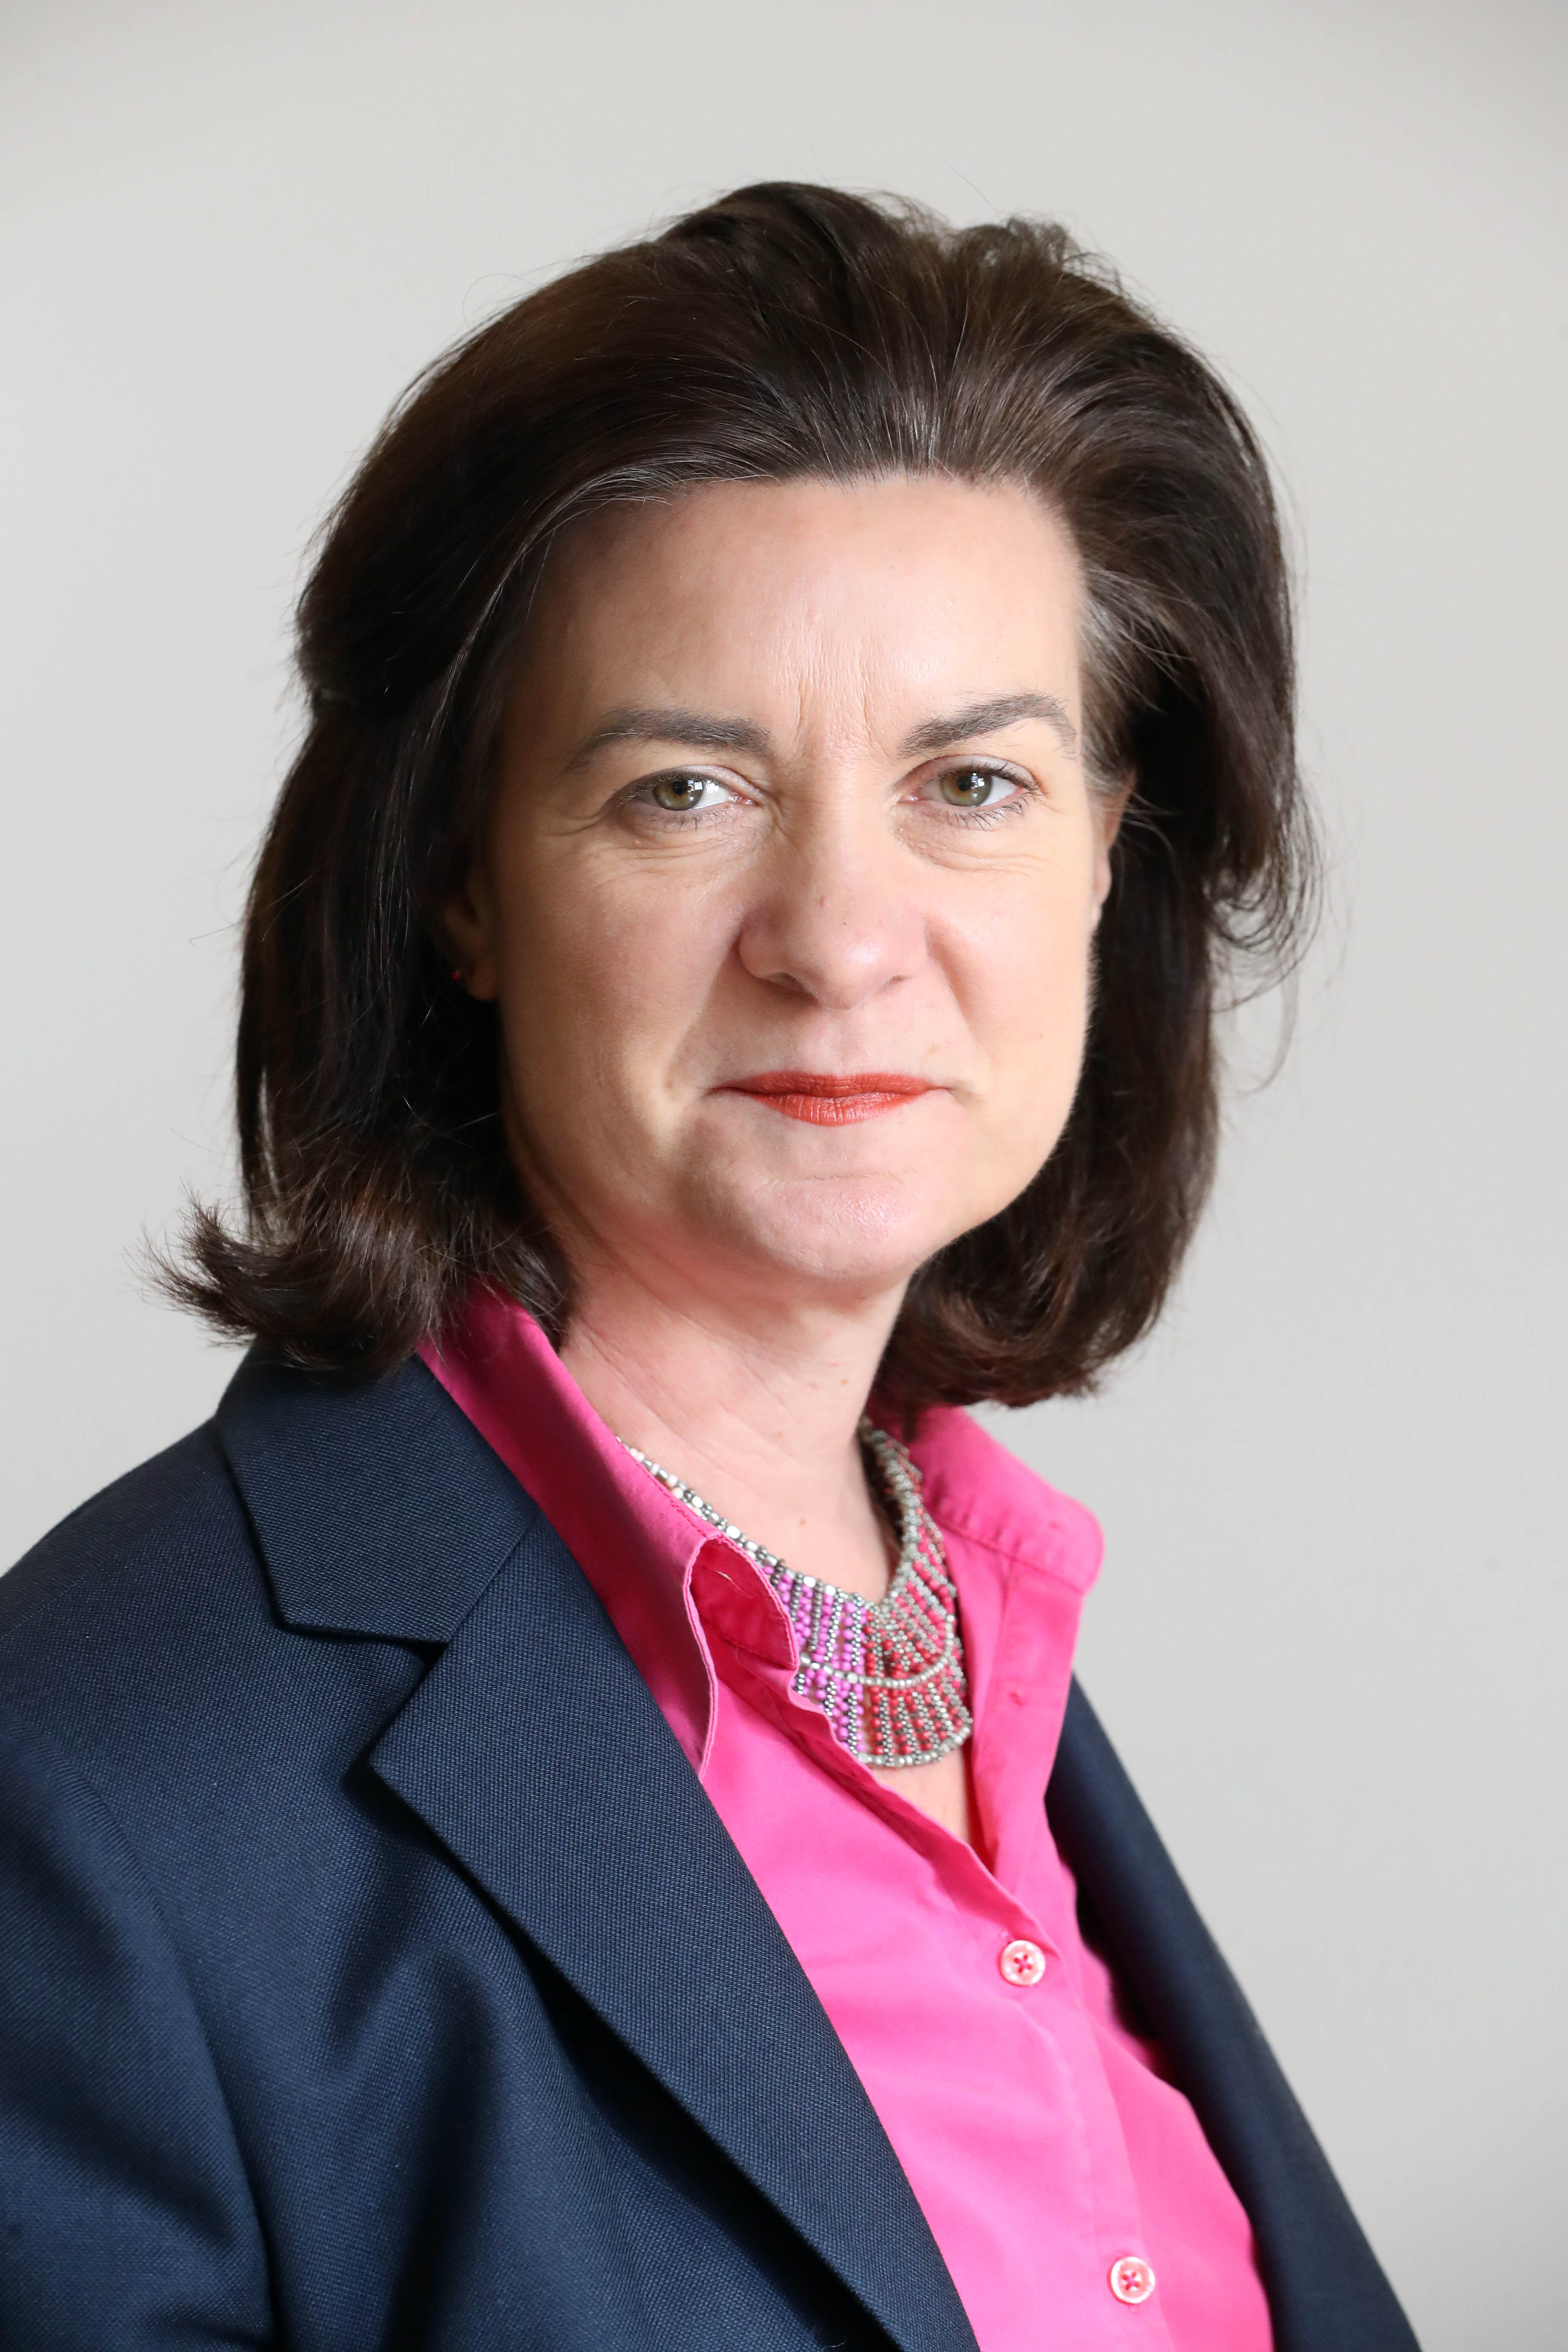 Welsh Government Minister for International Relations and the Welsh Language Eluned Morgan, who delivered the opening speech of the festival and chaired one of the plenary sessions.